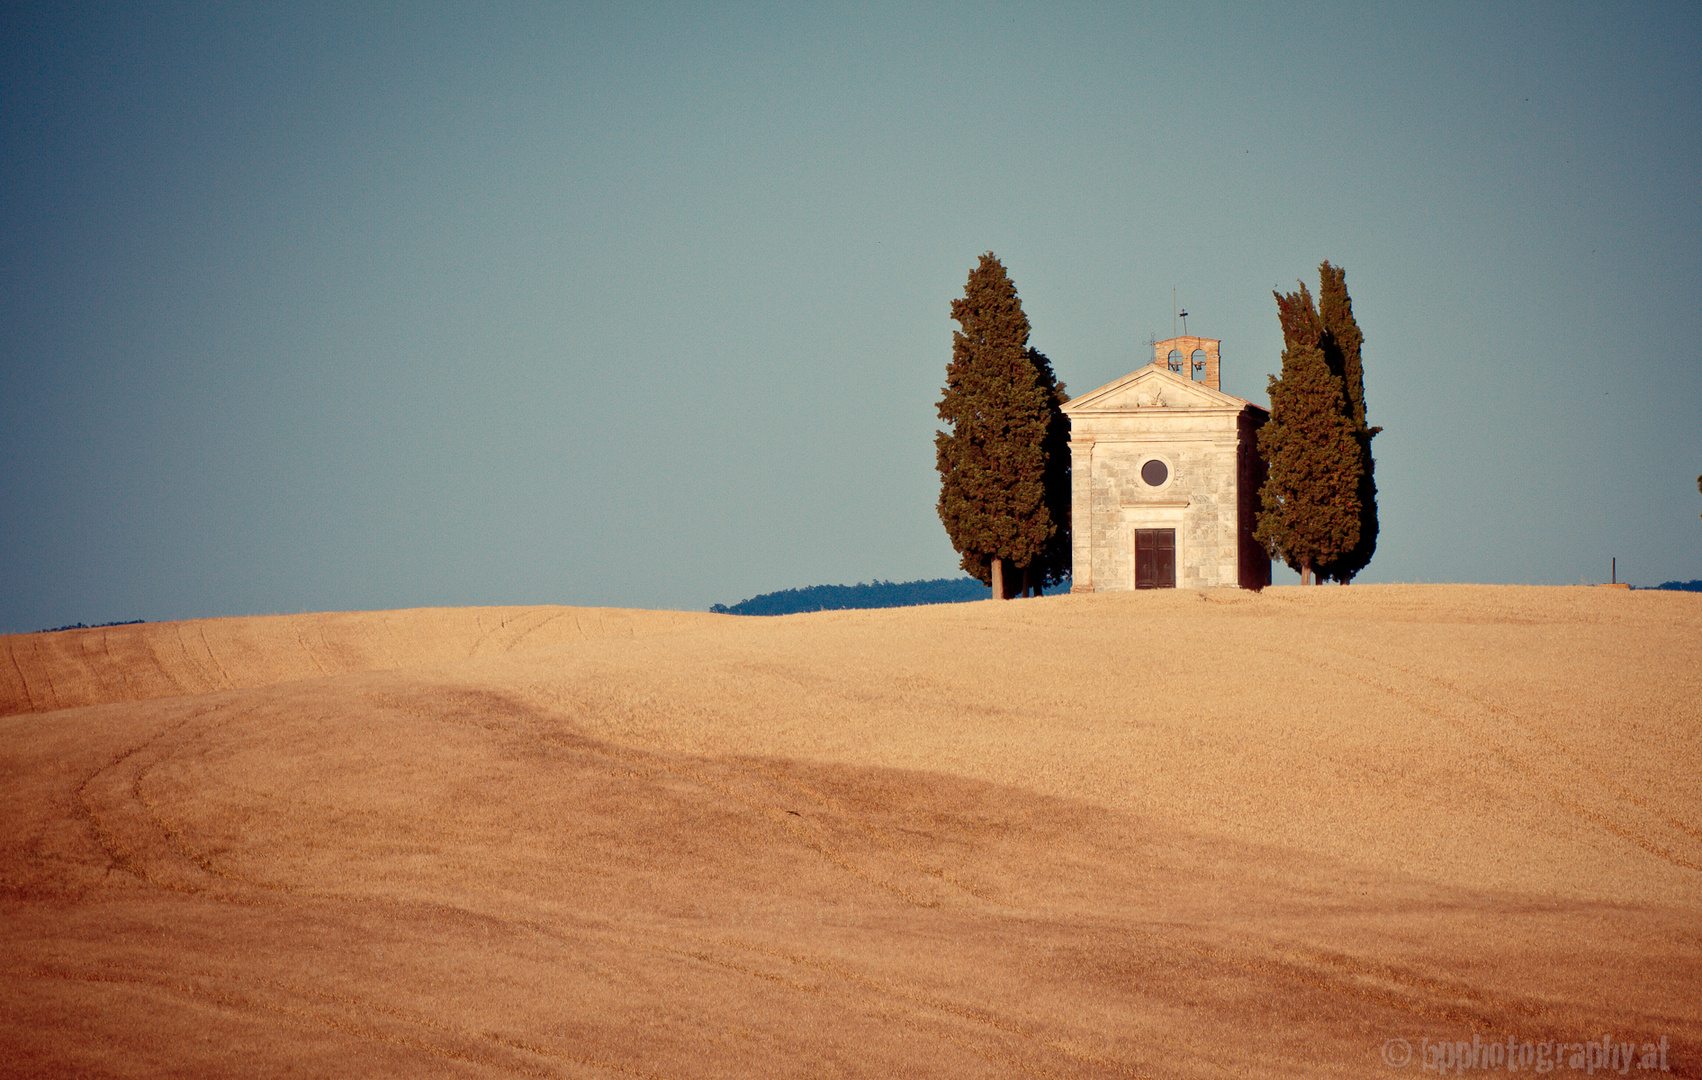 On the road to Pienza